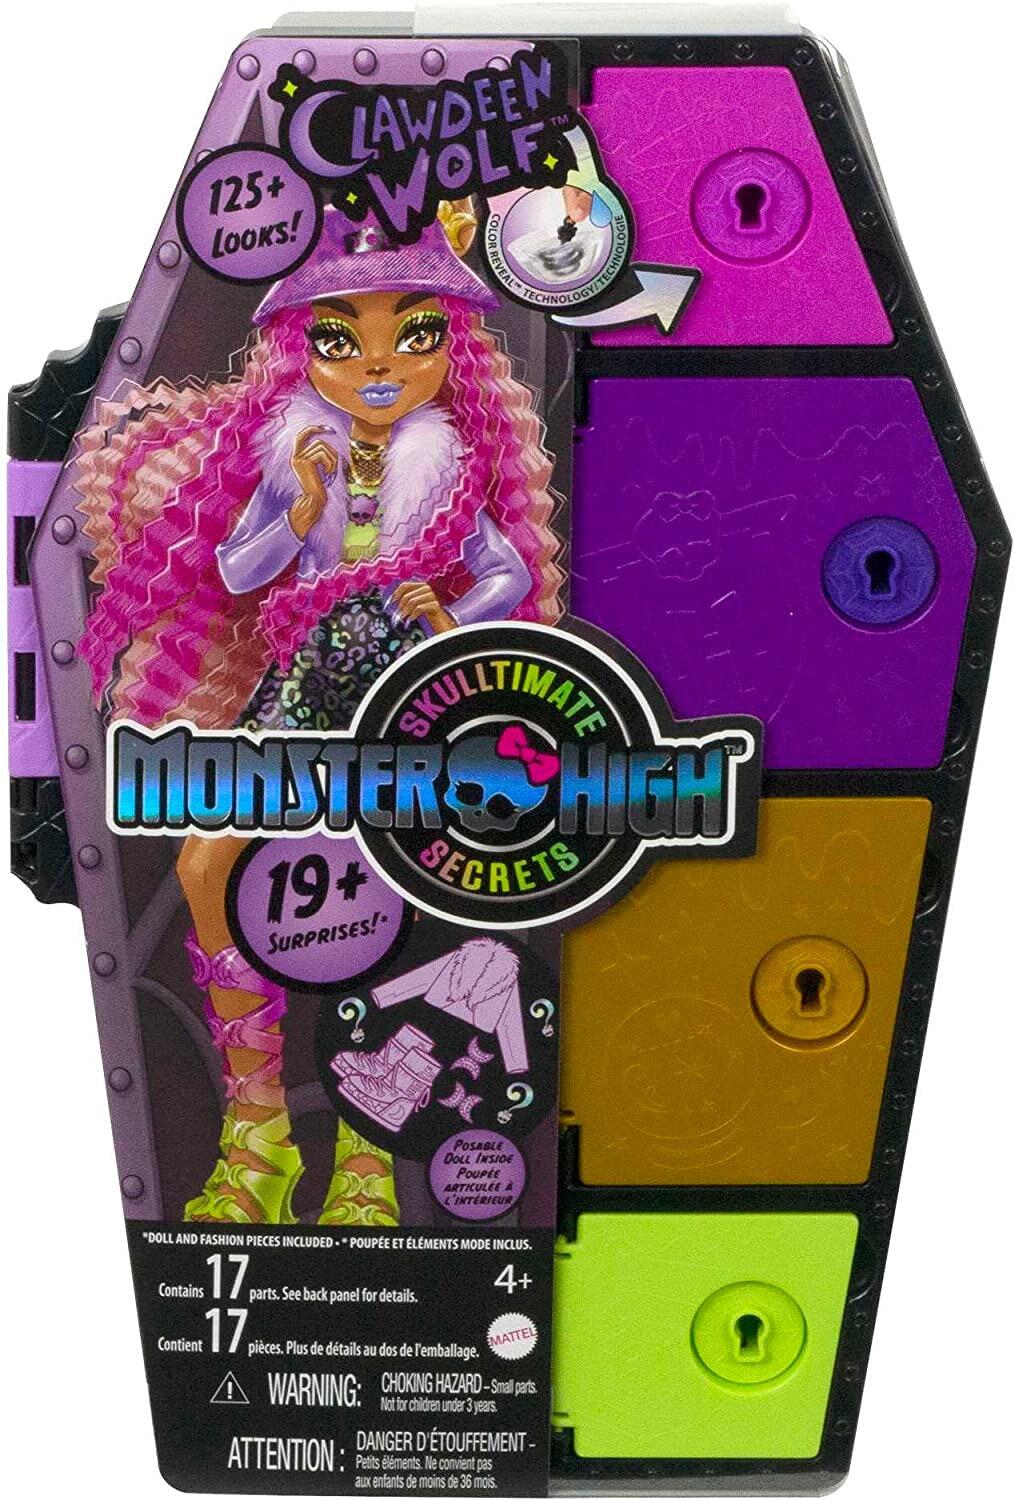 Monster High Skulltimate Secrets Doll and Fashion Set, Clawdeen with Dress-Up Locker and 19+ Accessories